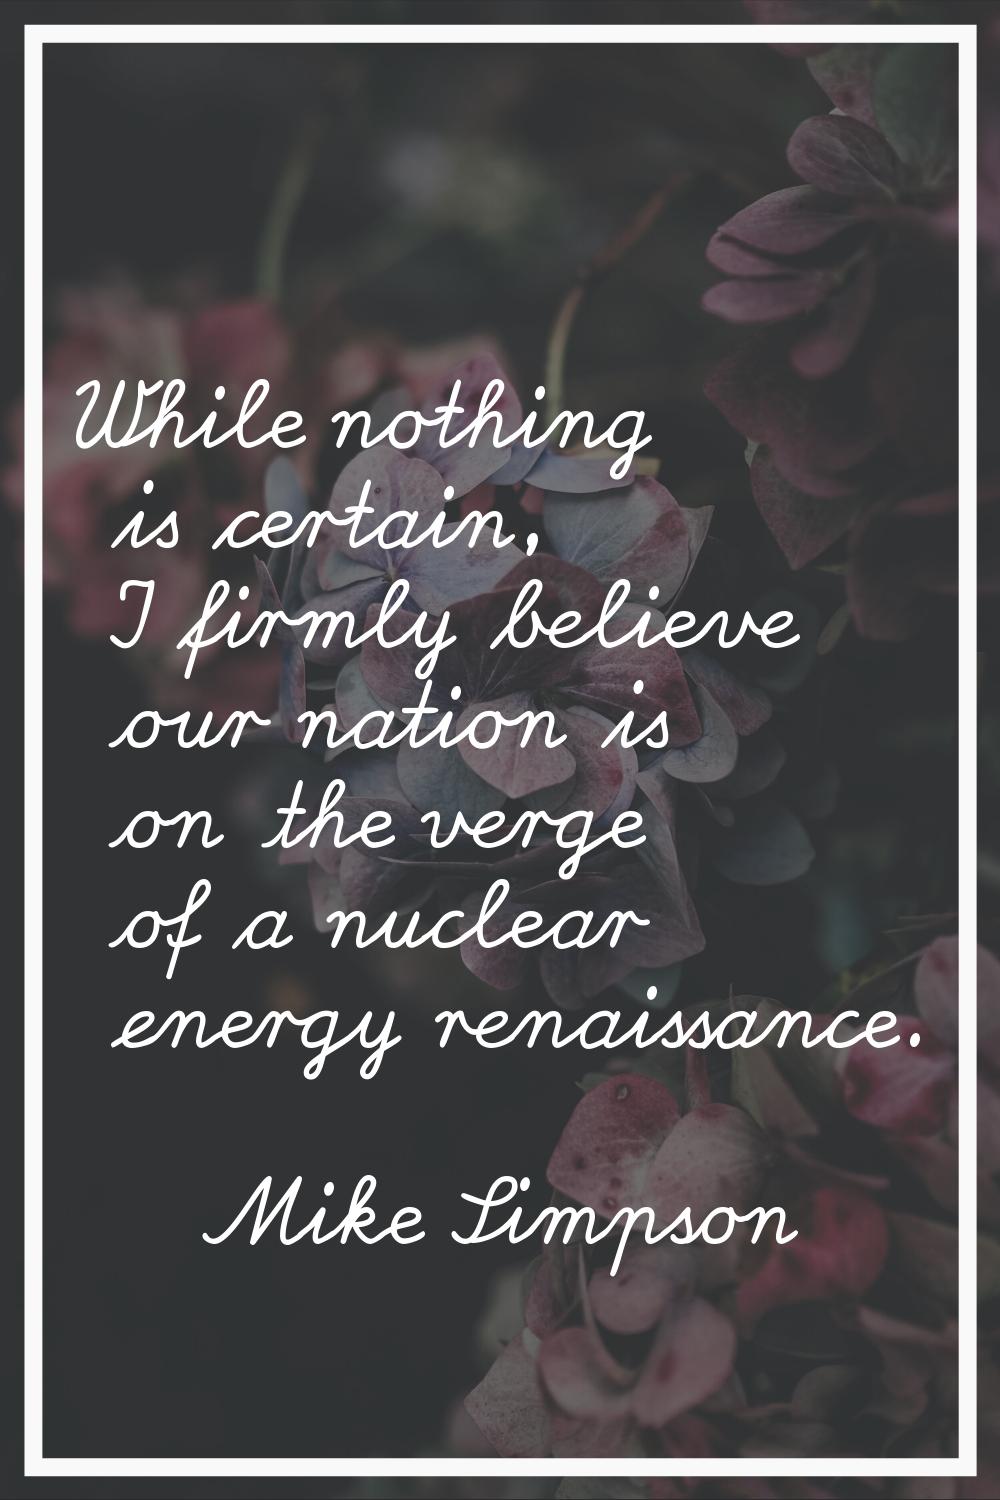 While nothing is certain, I firmly believe our nation is on the verge of a nuclear energy renaissan